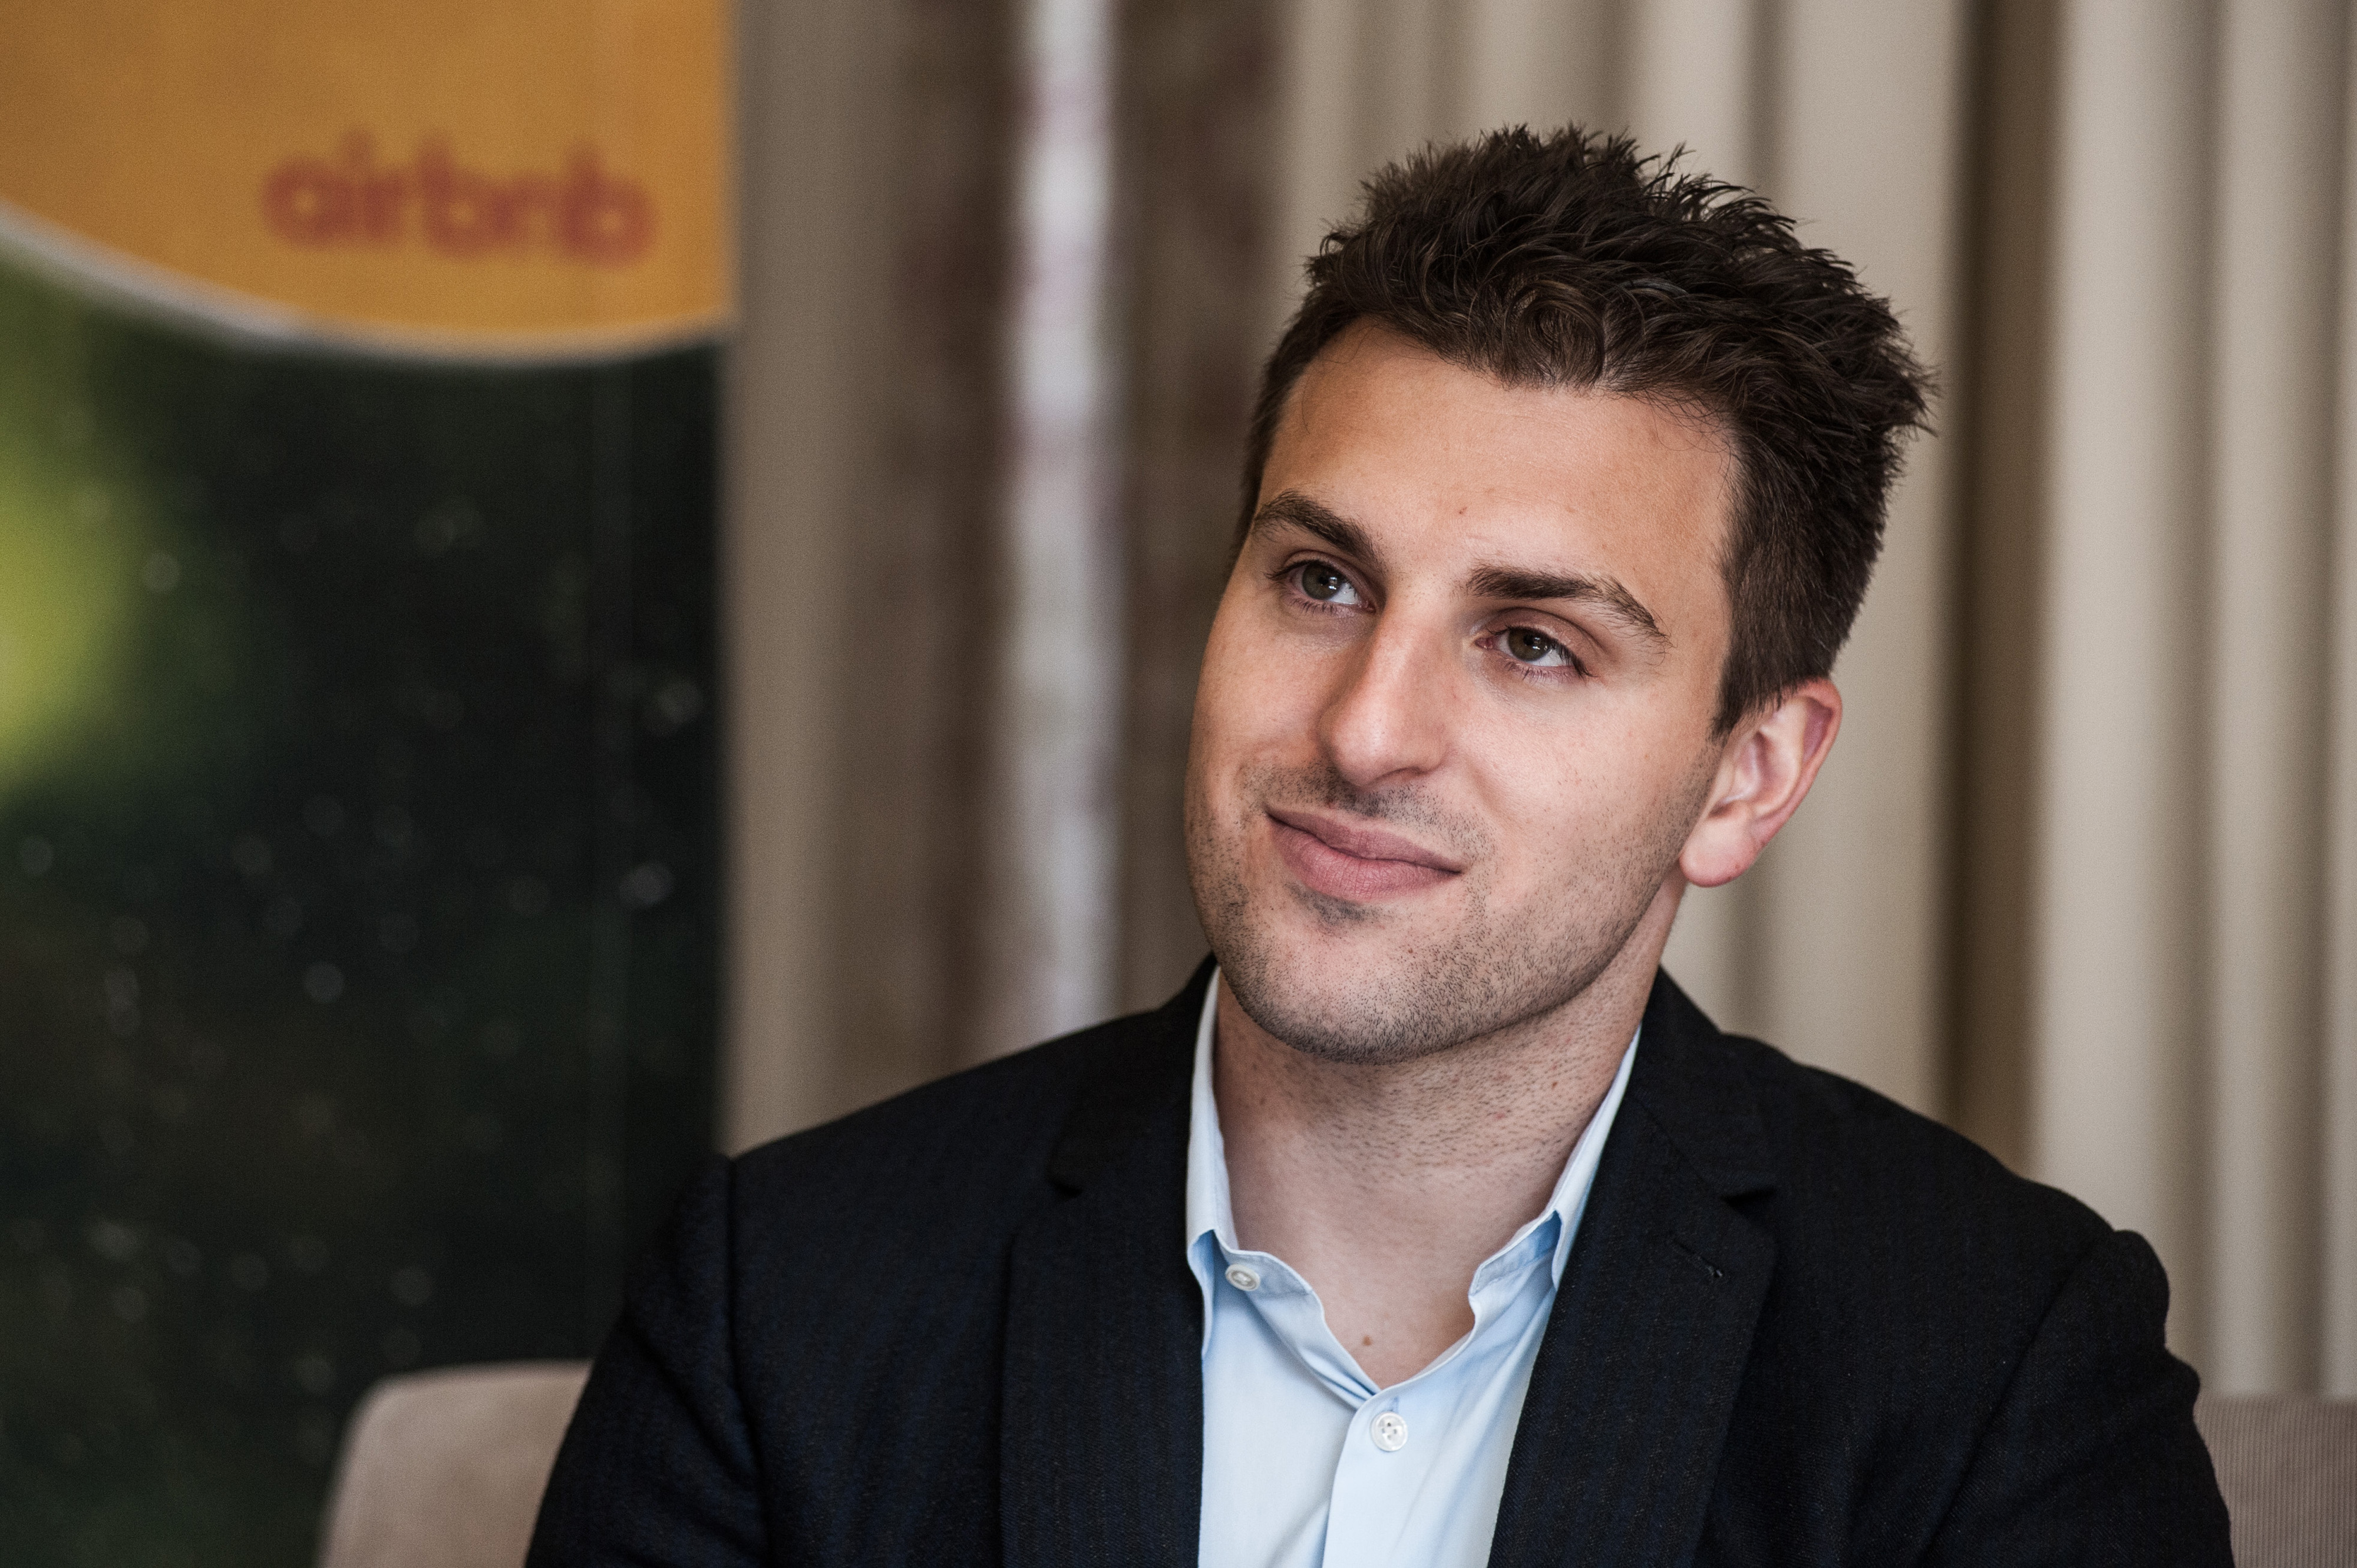 Airbnb Inc. Chief Executive Officer Brian Chesky As Company Plans Africa Expansion